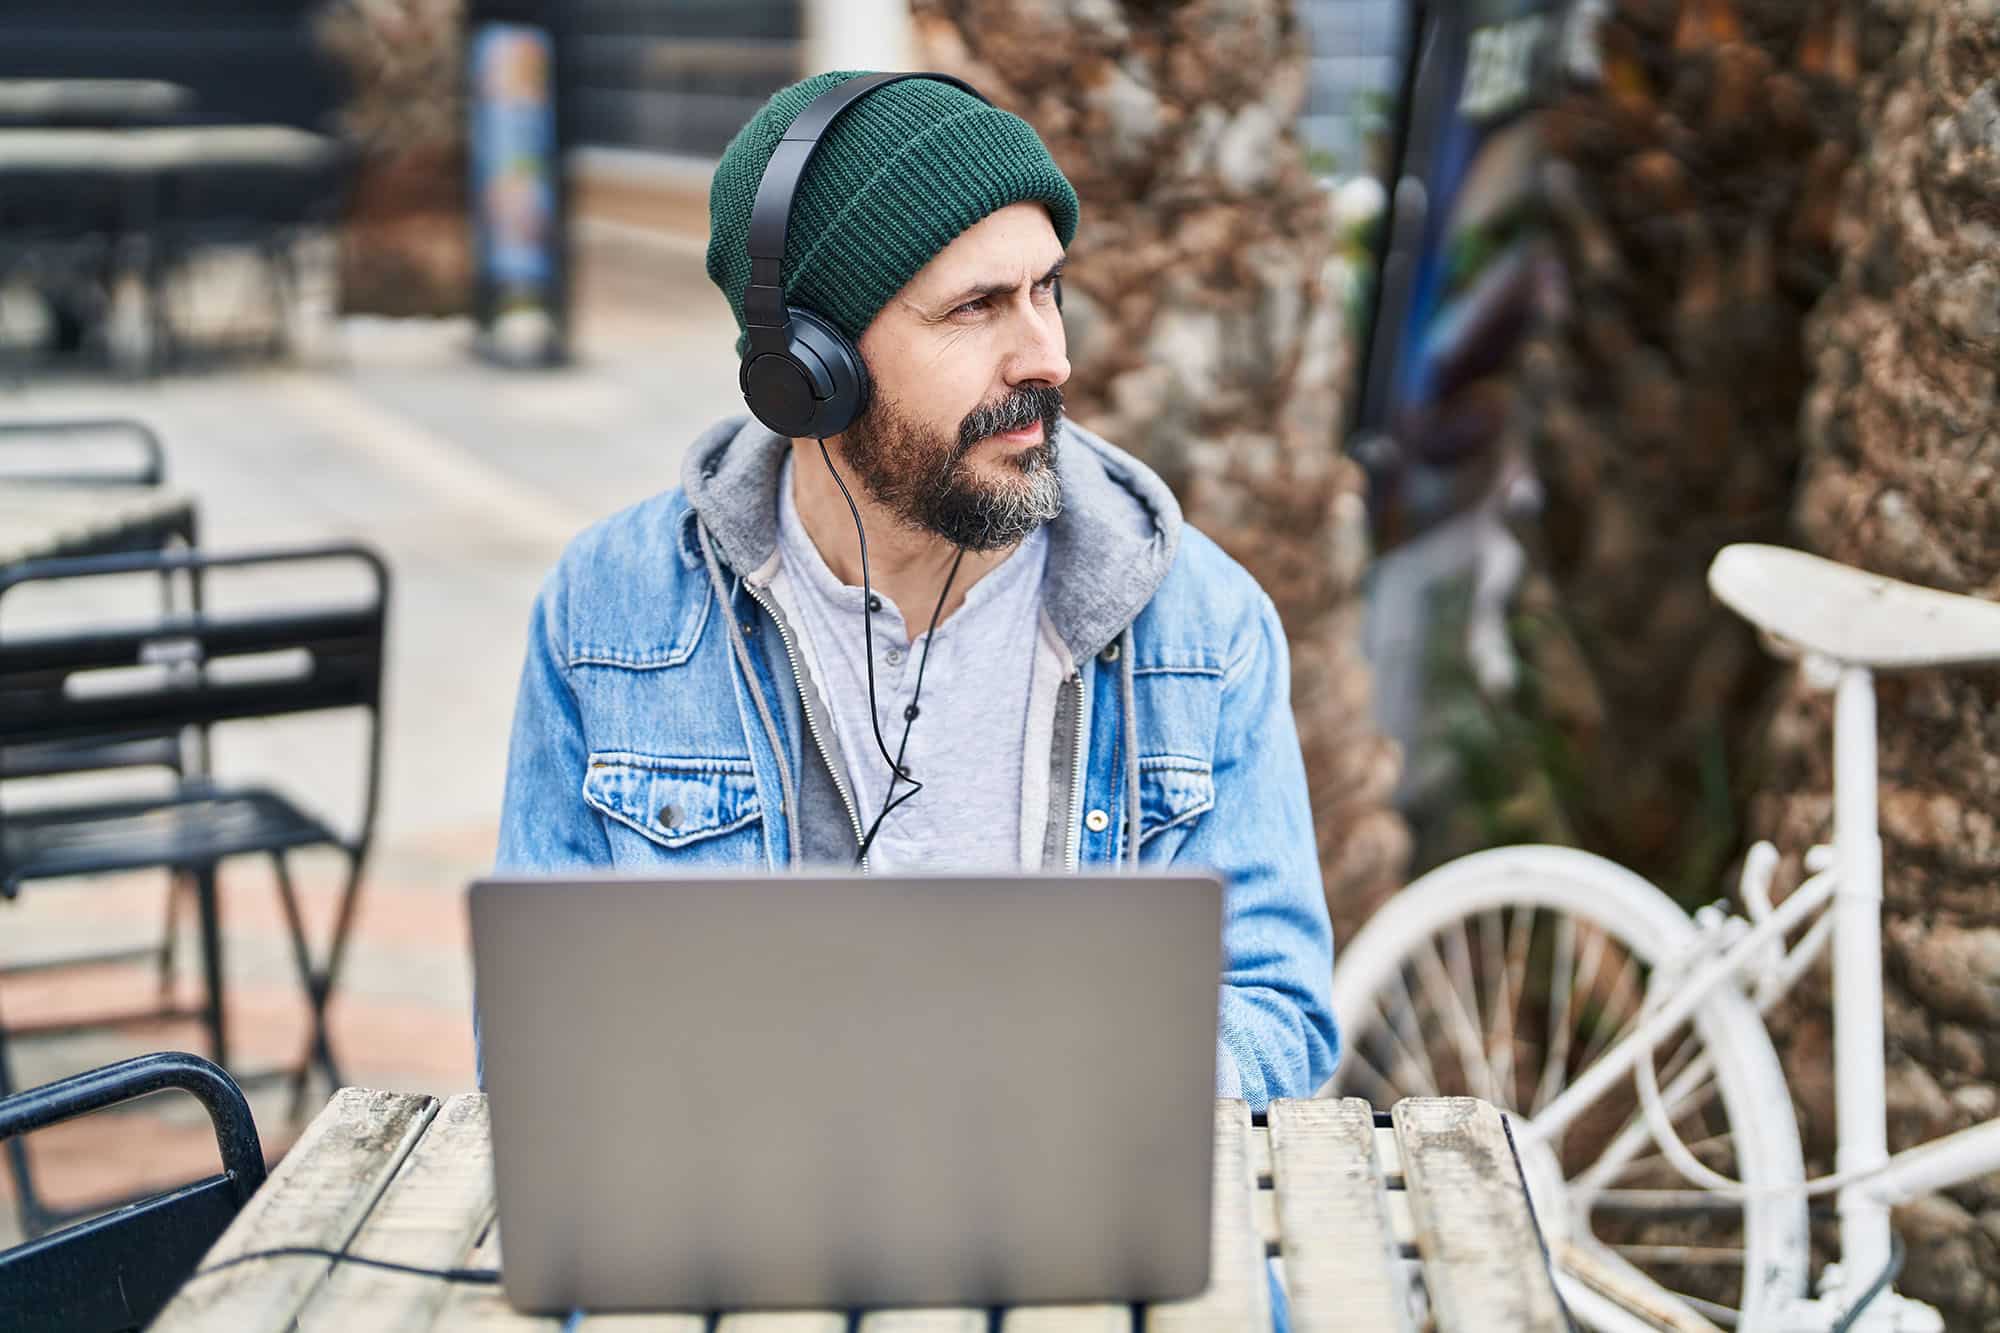 Man sitting outside with headphones and laptop